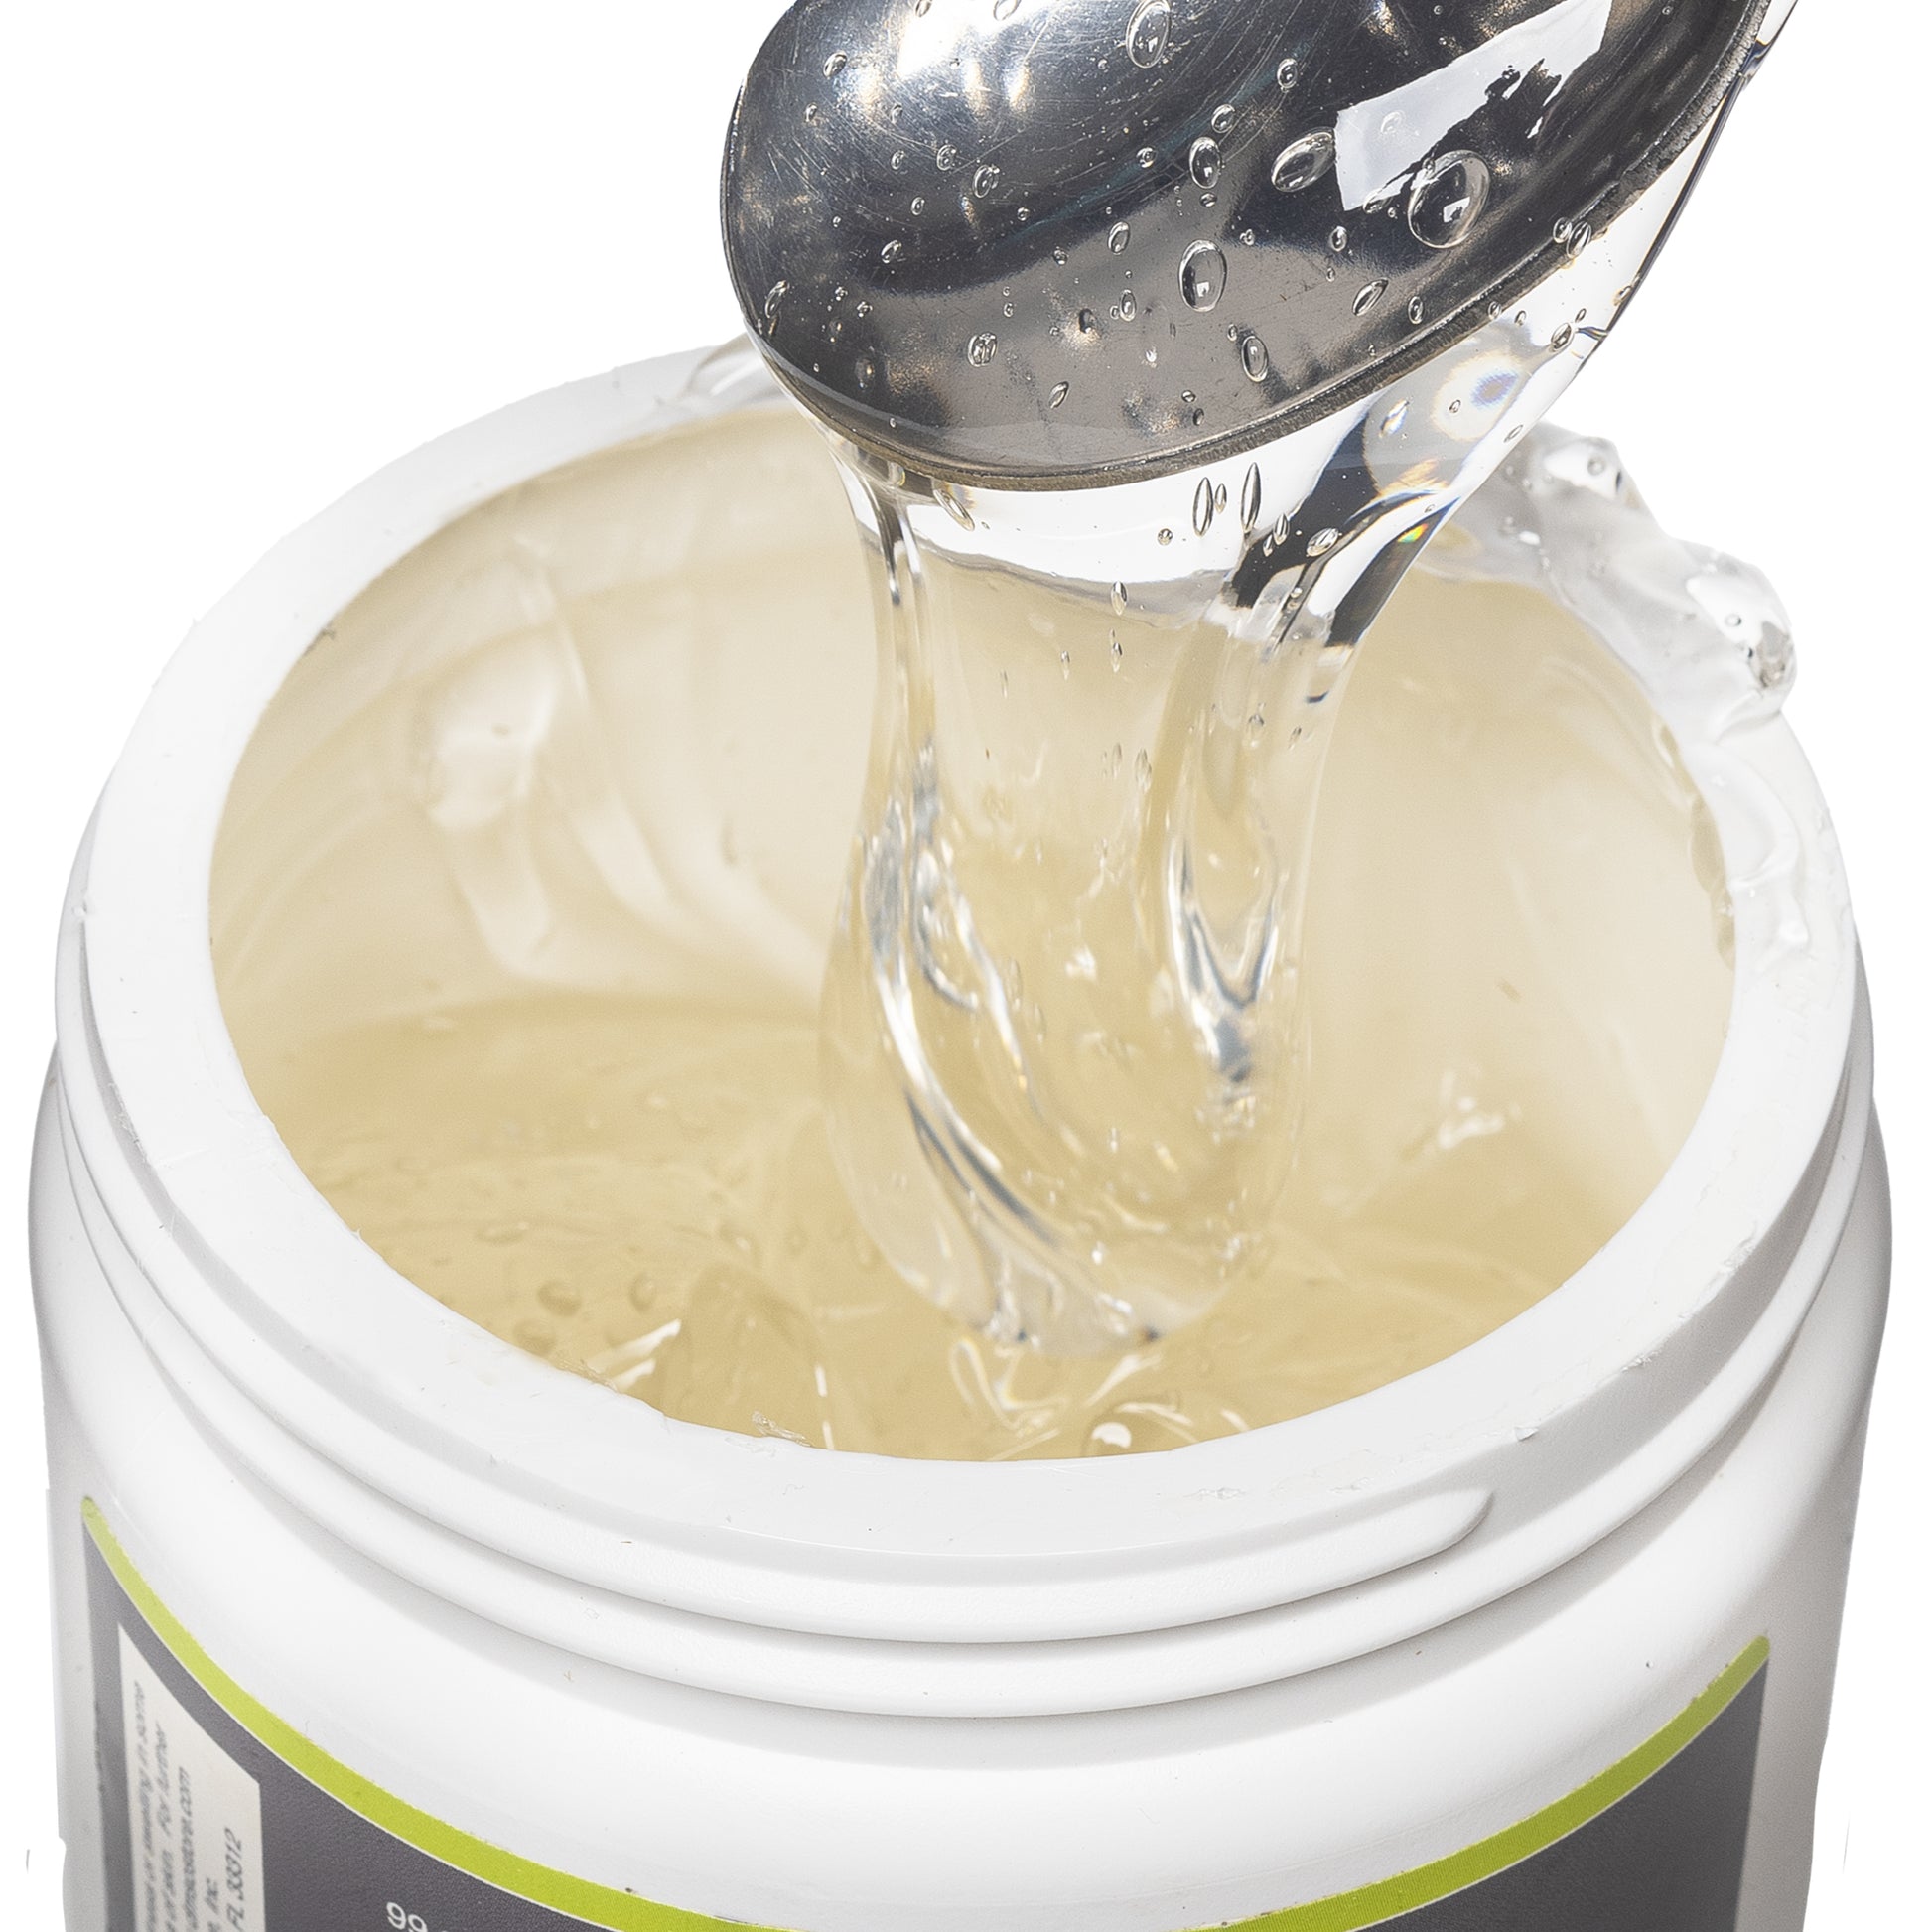 DMSO-aloe-Gel-dimethyl-sulfoxide-buy-best-Closeup. Opened view of the 4 oz 70/30 Aloe Vera gel jar. Contents revealed is the Aloe Vera gel product. Product is being scooped upwards with a spoon to show consistency.